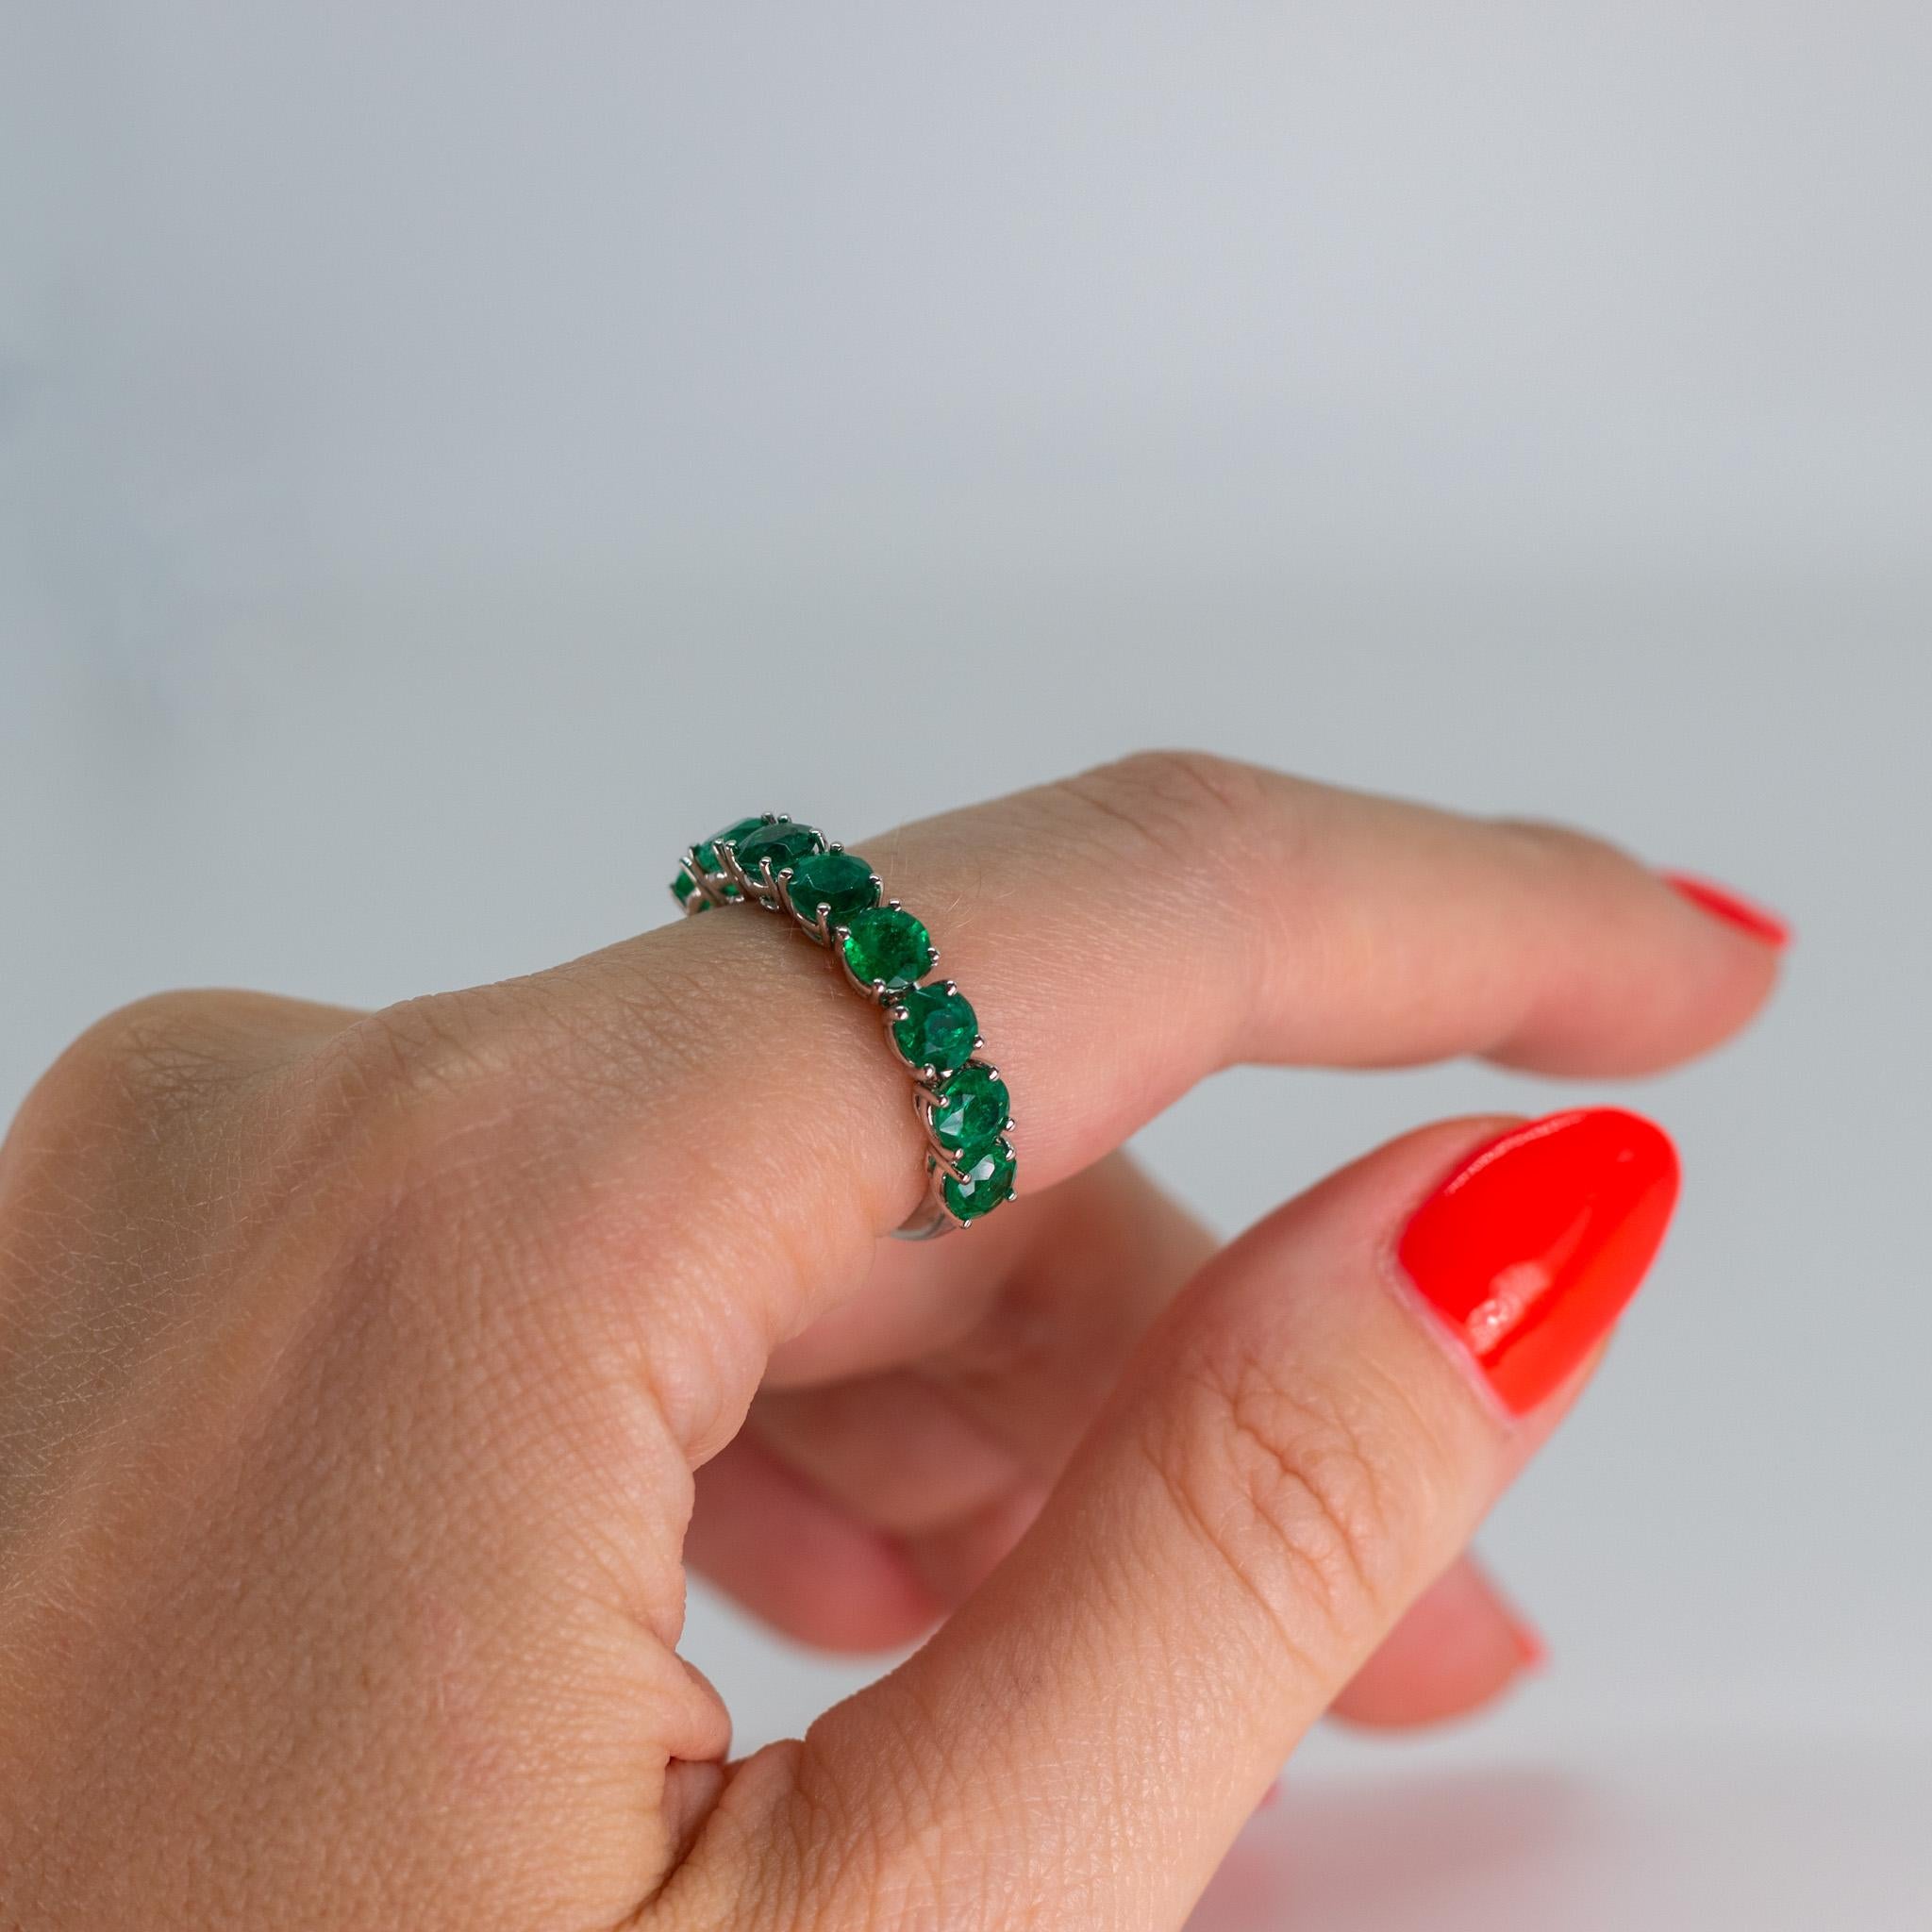 Beautiful Zambian green emerald eternity ring featuring 8 round natural emeralds set in a platinum ring.

Emeralds are said to bing good fortune and good luck to the wearer, and to attract wealth. In addition, emeralds are believed to attract